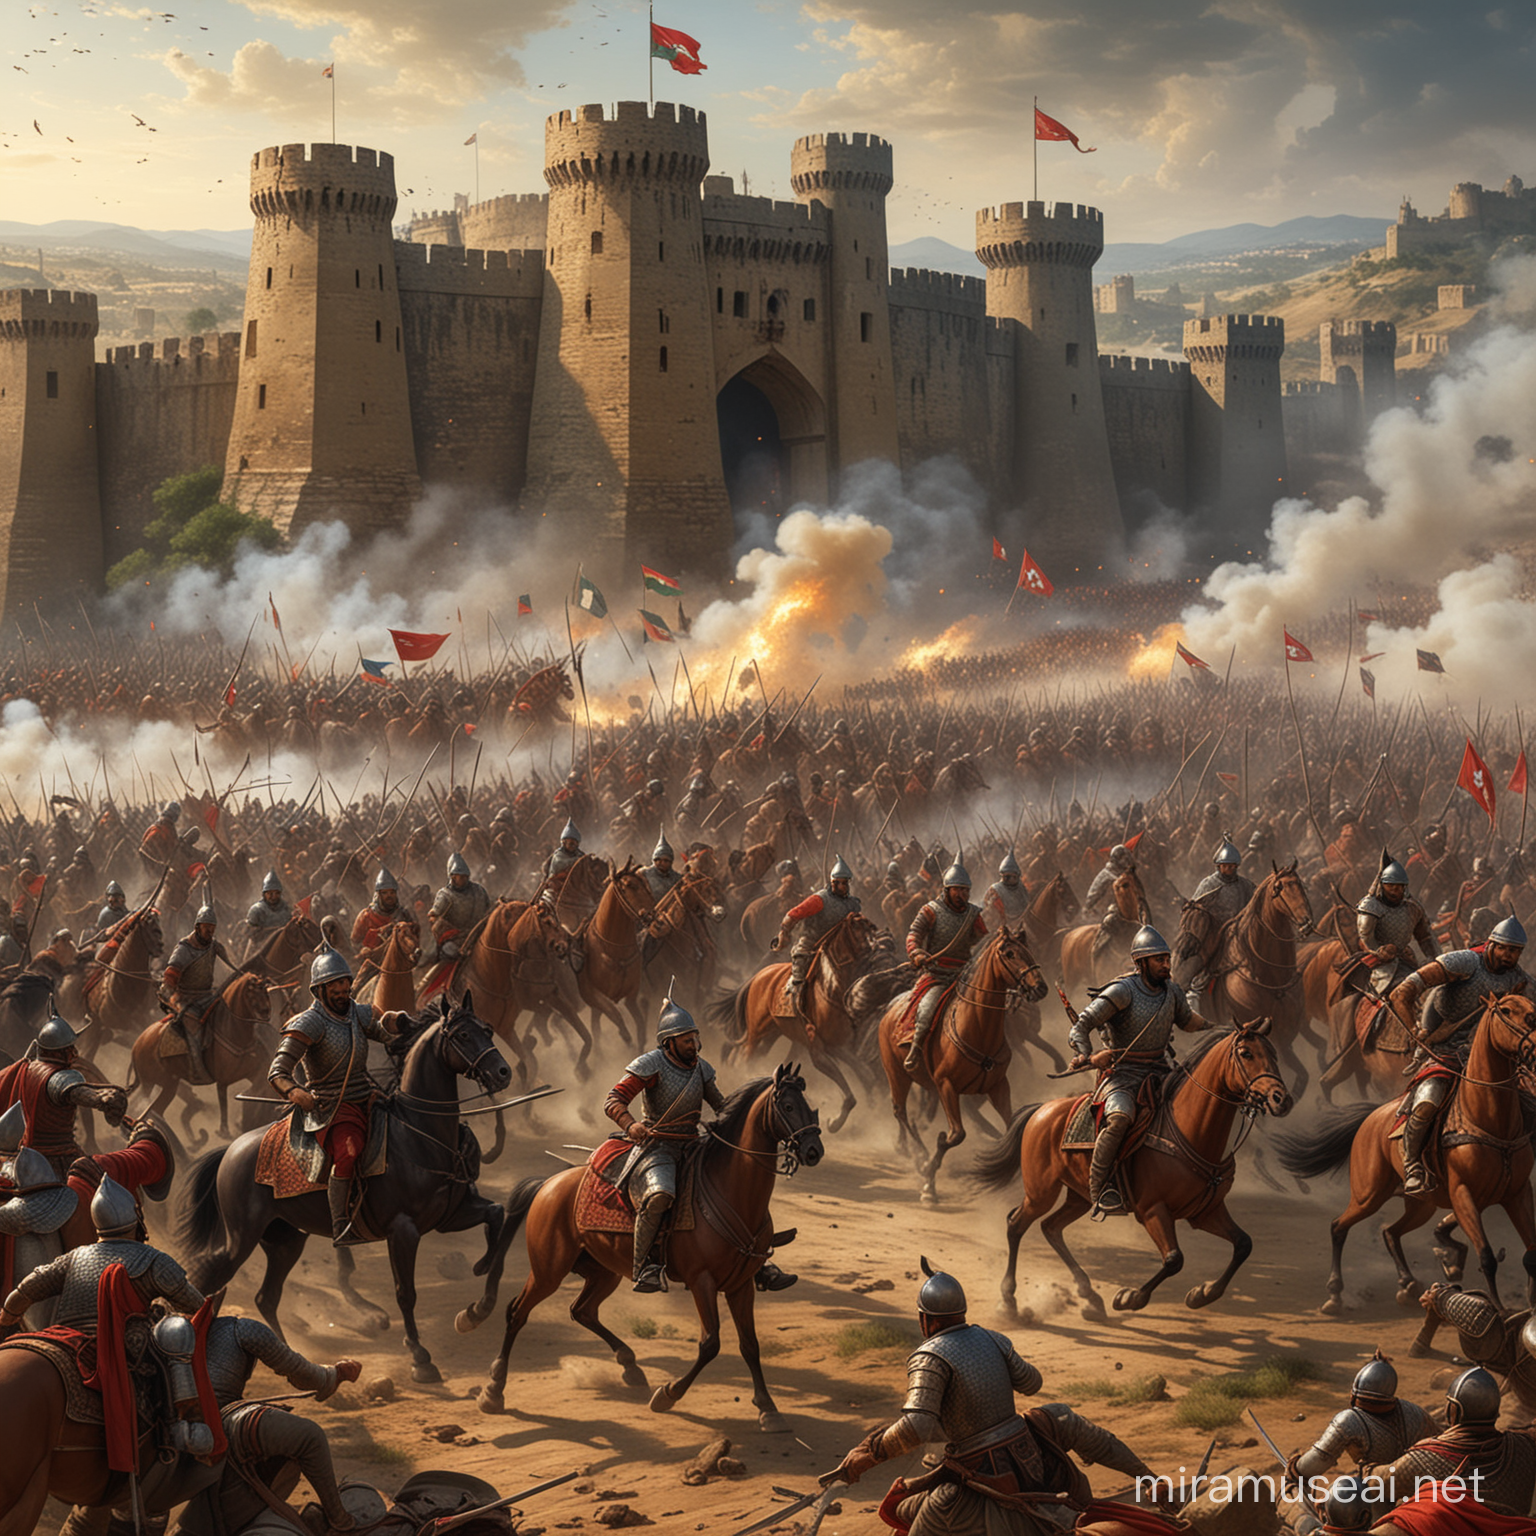 A dramatic battle scene at the gates of Gowa's fortress, showcasing Sultan Hasanuddin's strategic brilliance as his troops outmaneuver and defeat the well-equipped Portuguese army, symbolizing the resilience and strength of the Gowa Kingdom.